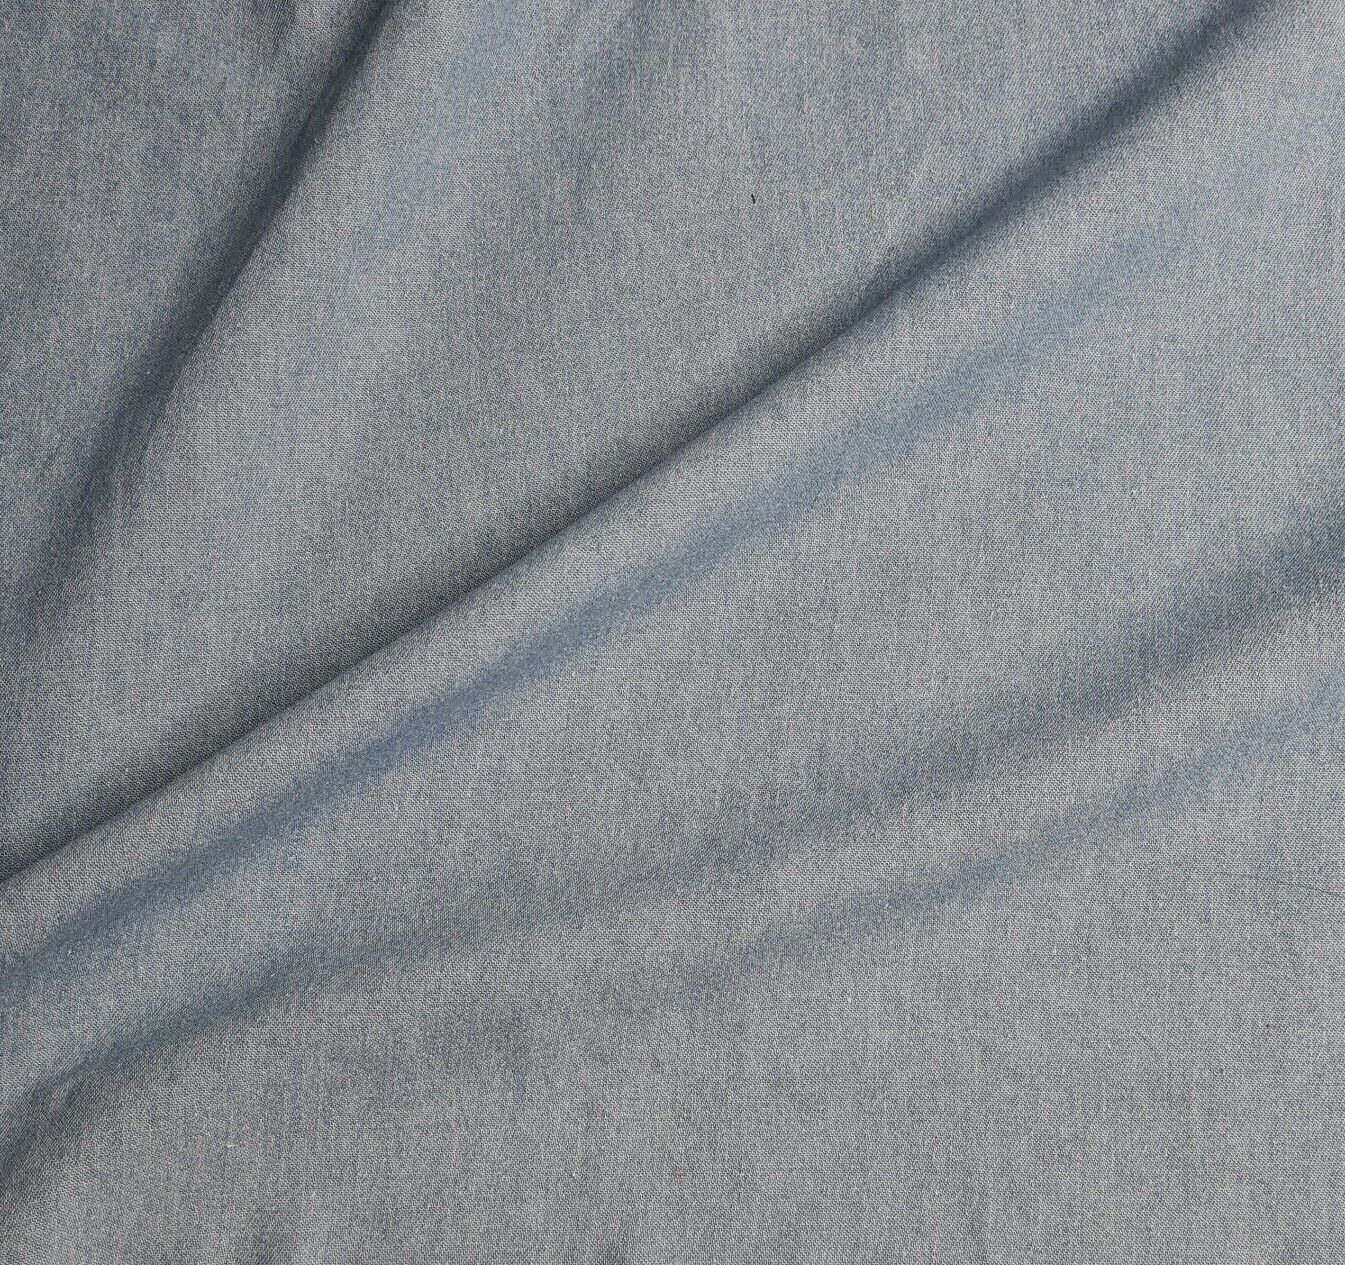 Cotton Denim Fabric Thin And Soft Light Blue Colour 55" Wide Sold By The Metre